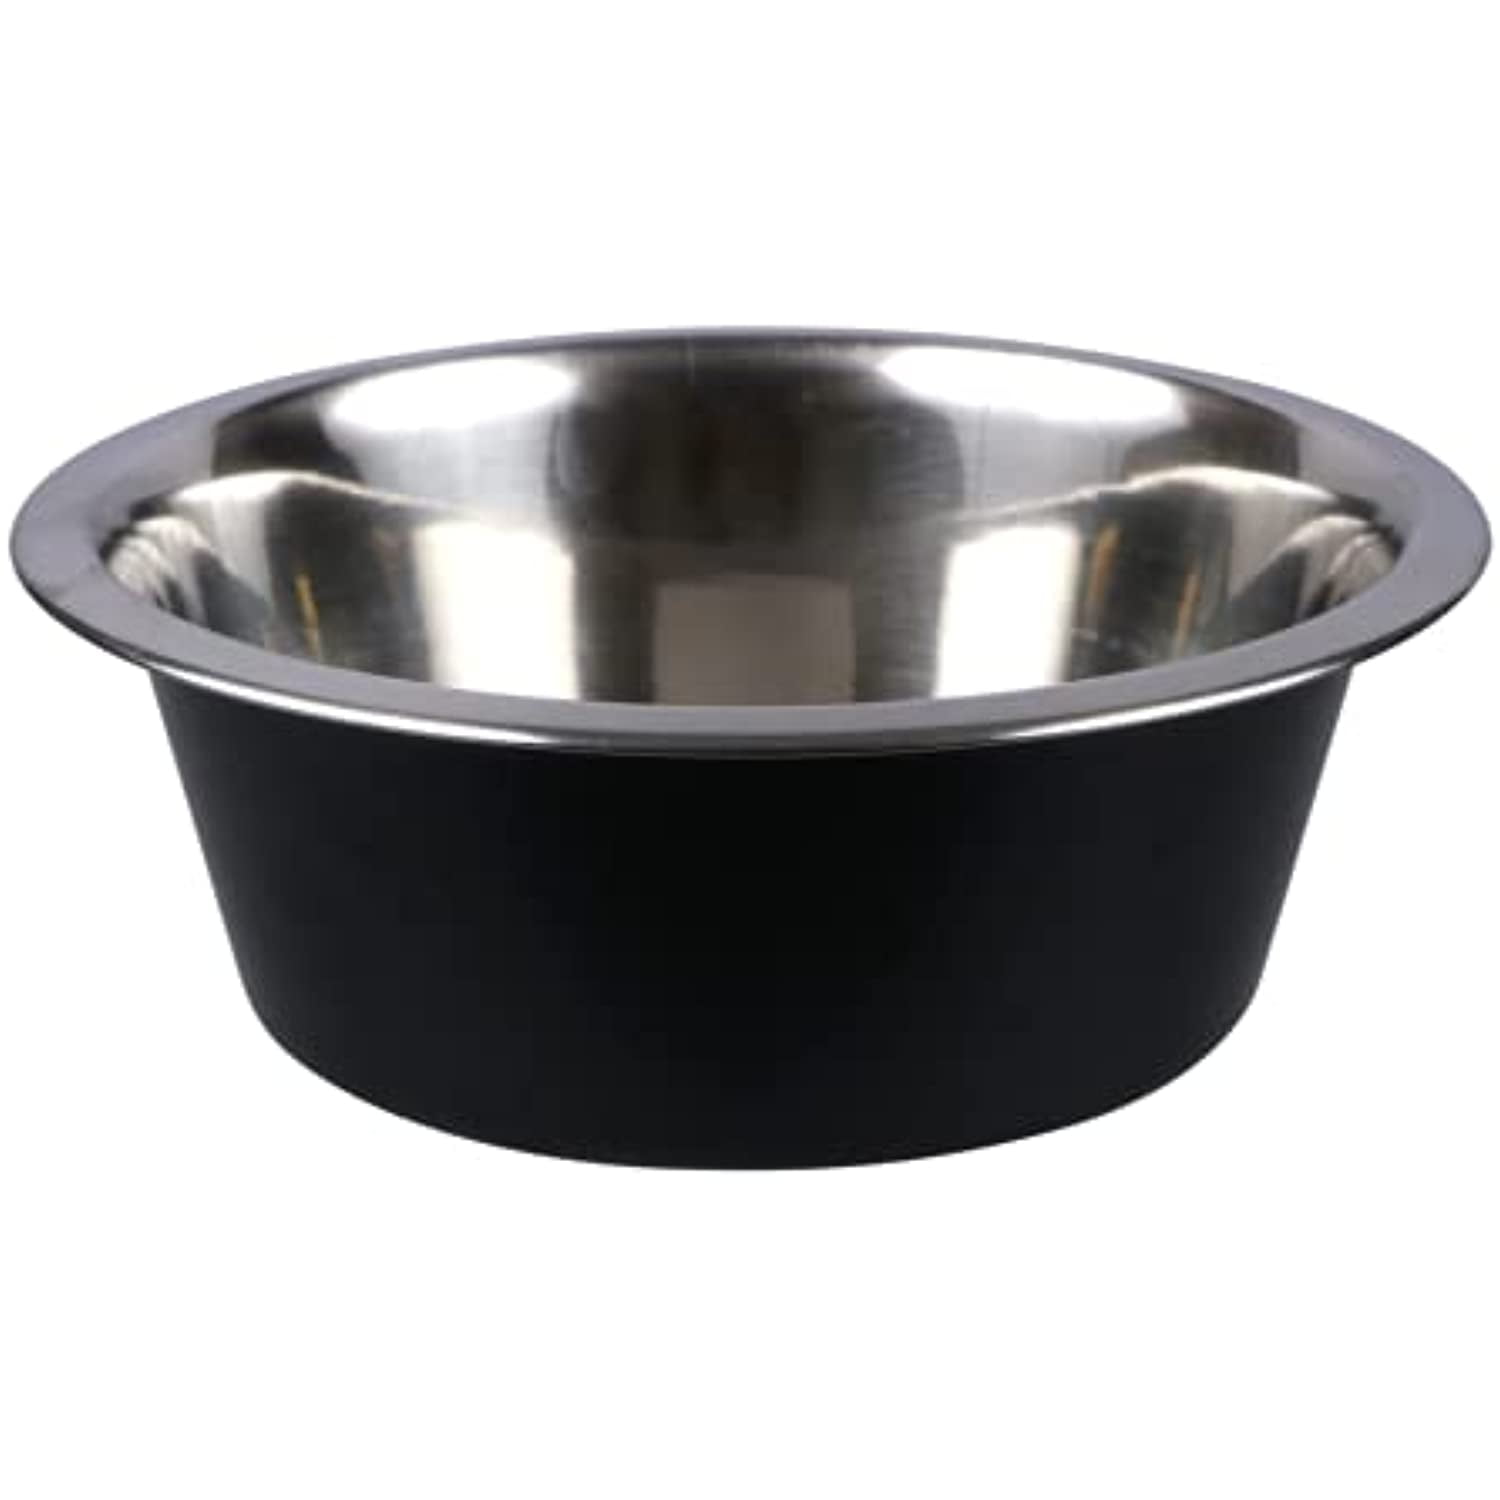 Tall Tails Stainless Steel Dog Bowl, Charcoal, 1.5-cups (**)